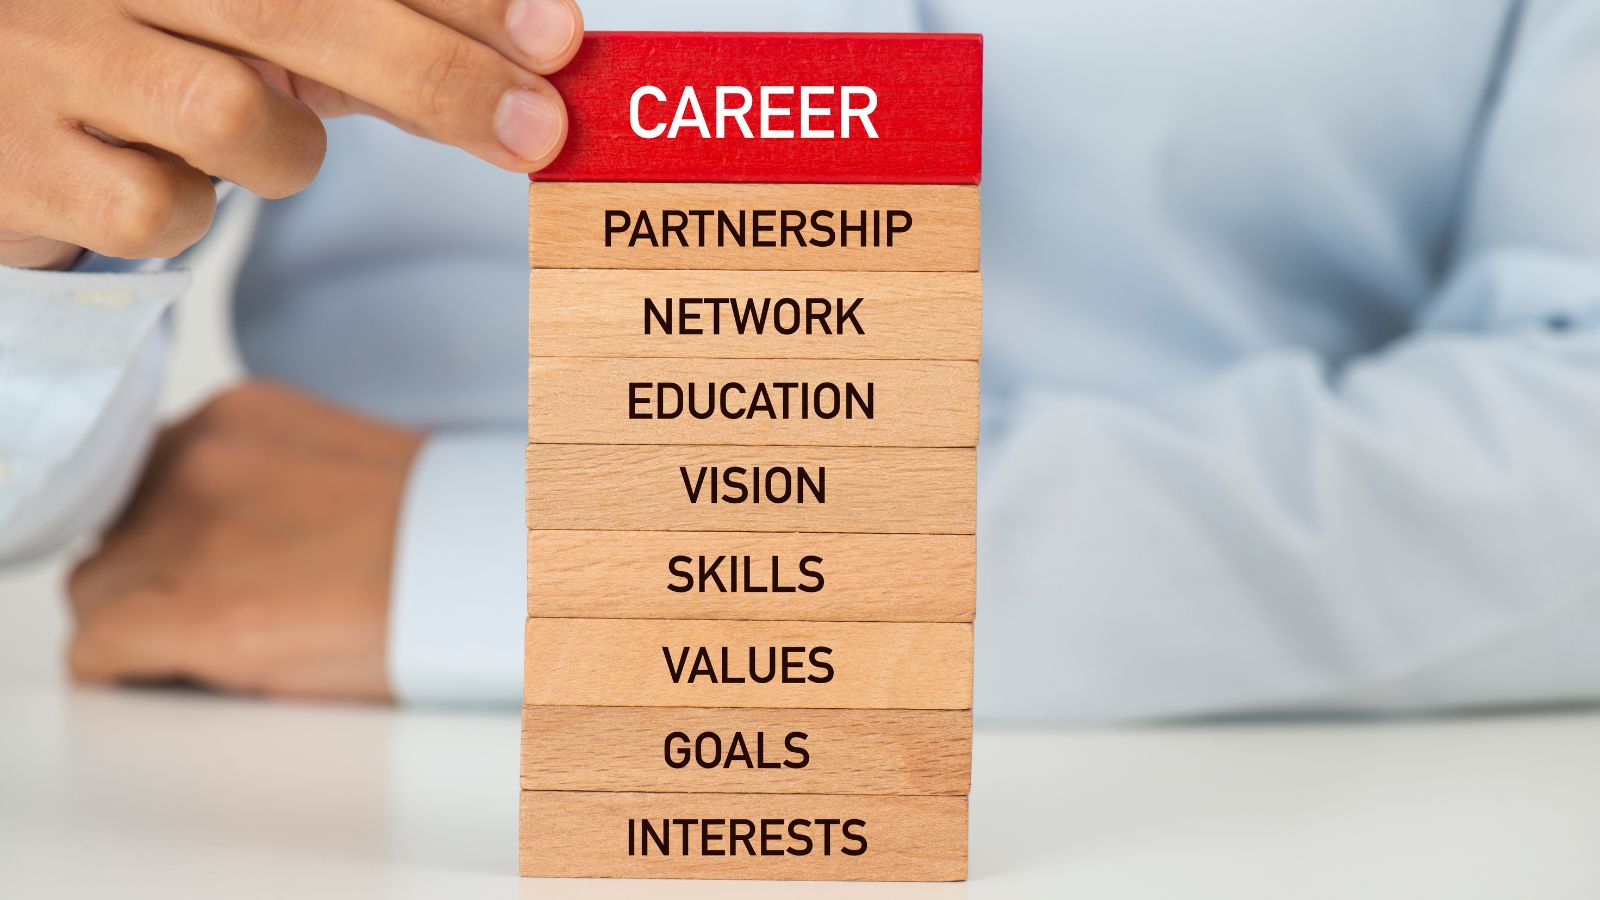 Career Mentoring in the workplace